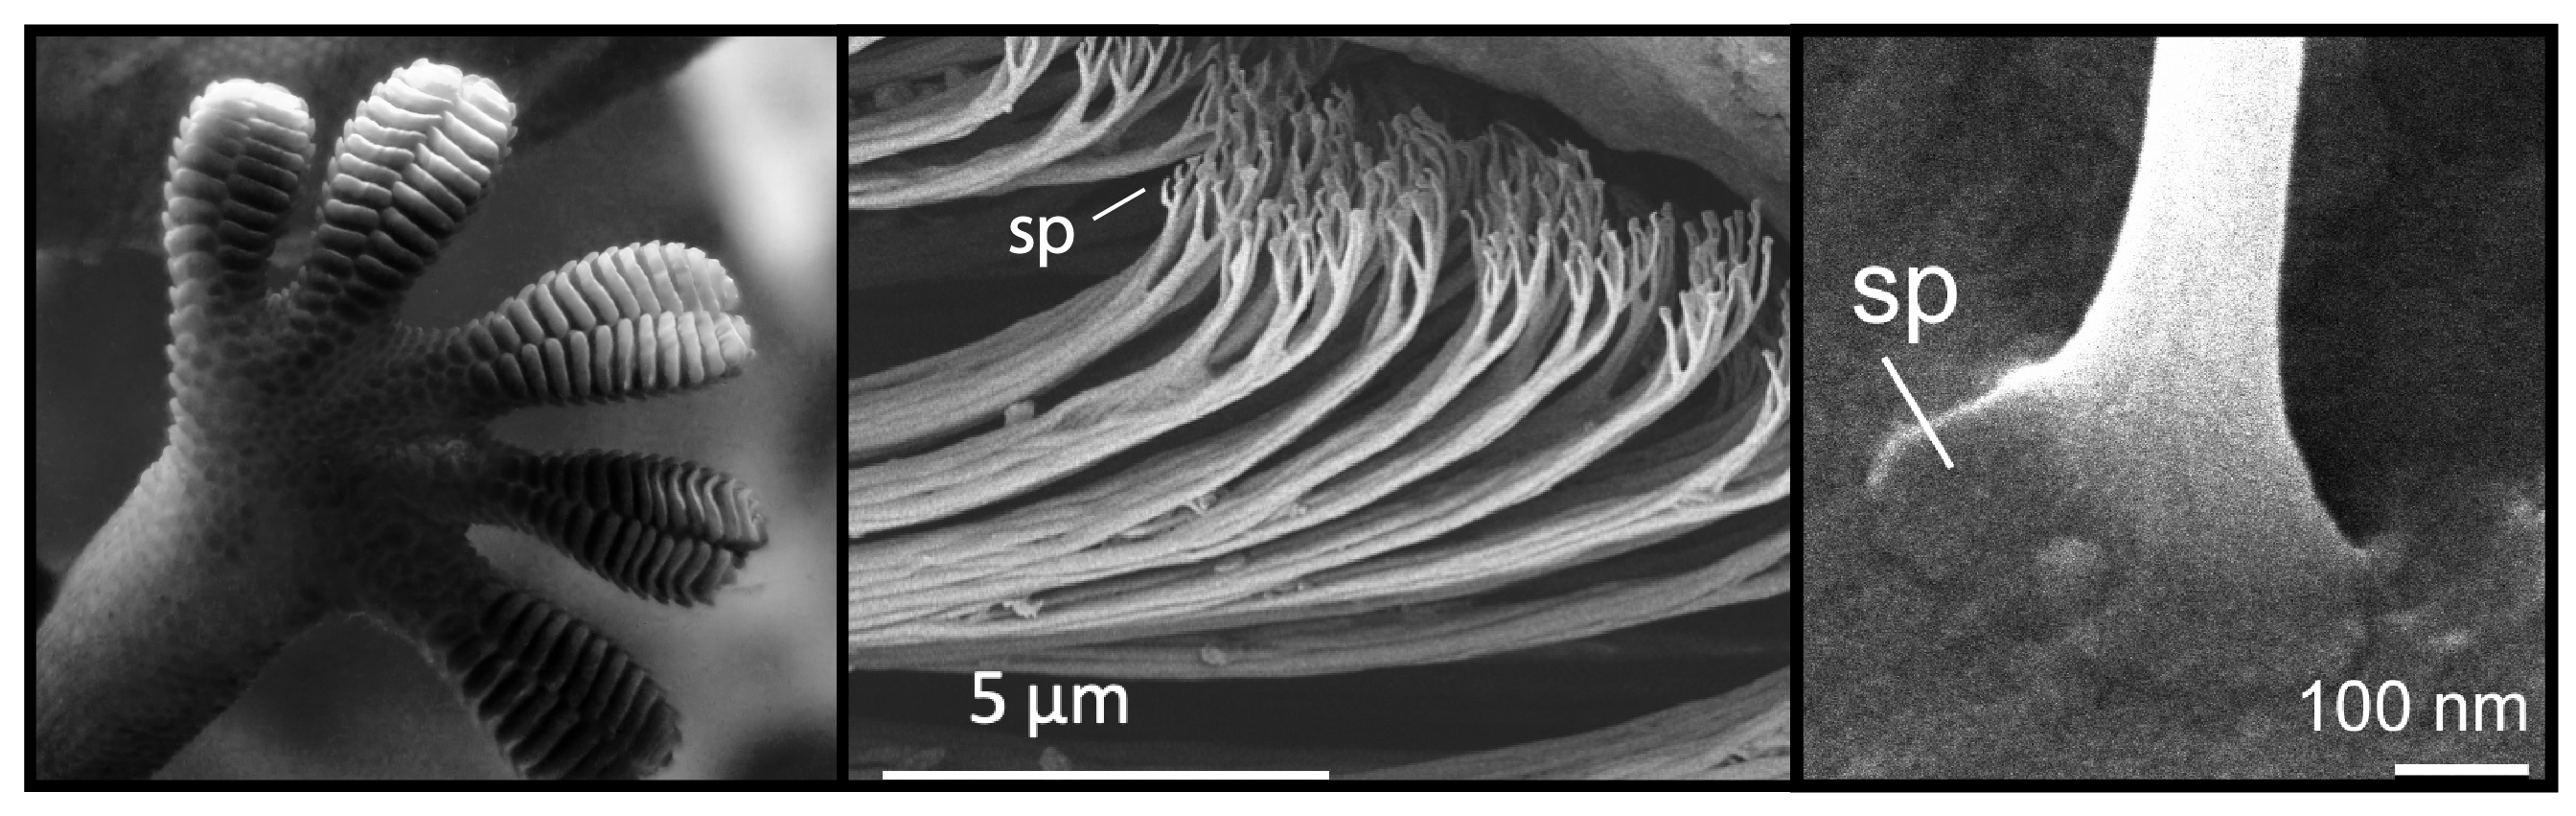 A composite of three black and white images, including a photograph of the underside a gecko’s foot, a microscope image of hairlike structures, and a second microscope image of the flat, wide shape at the end of the hairlike structures.